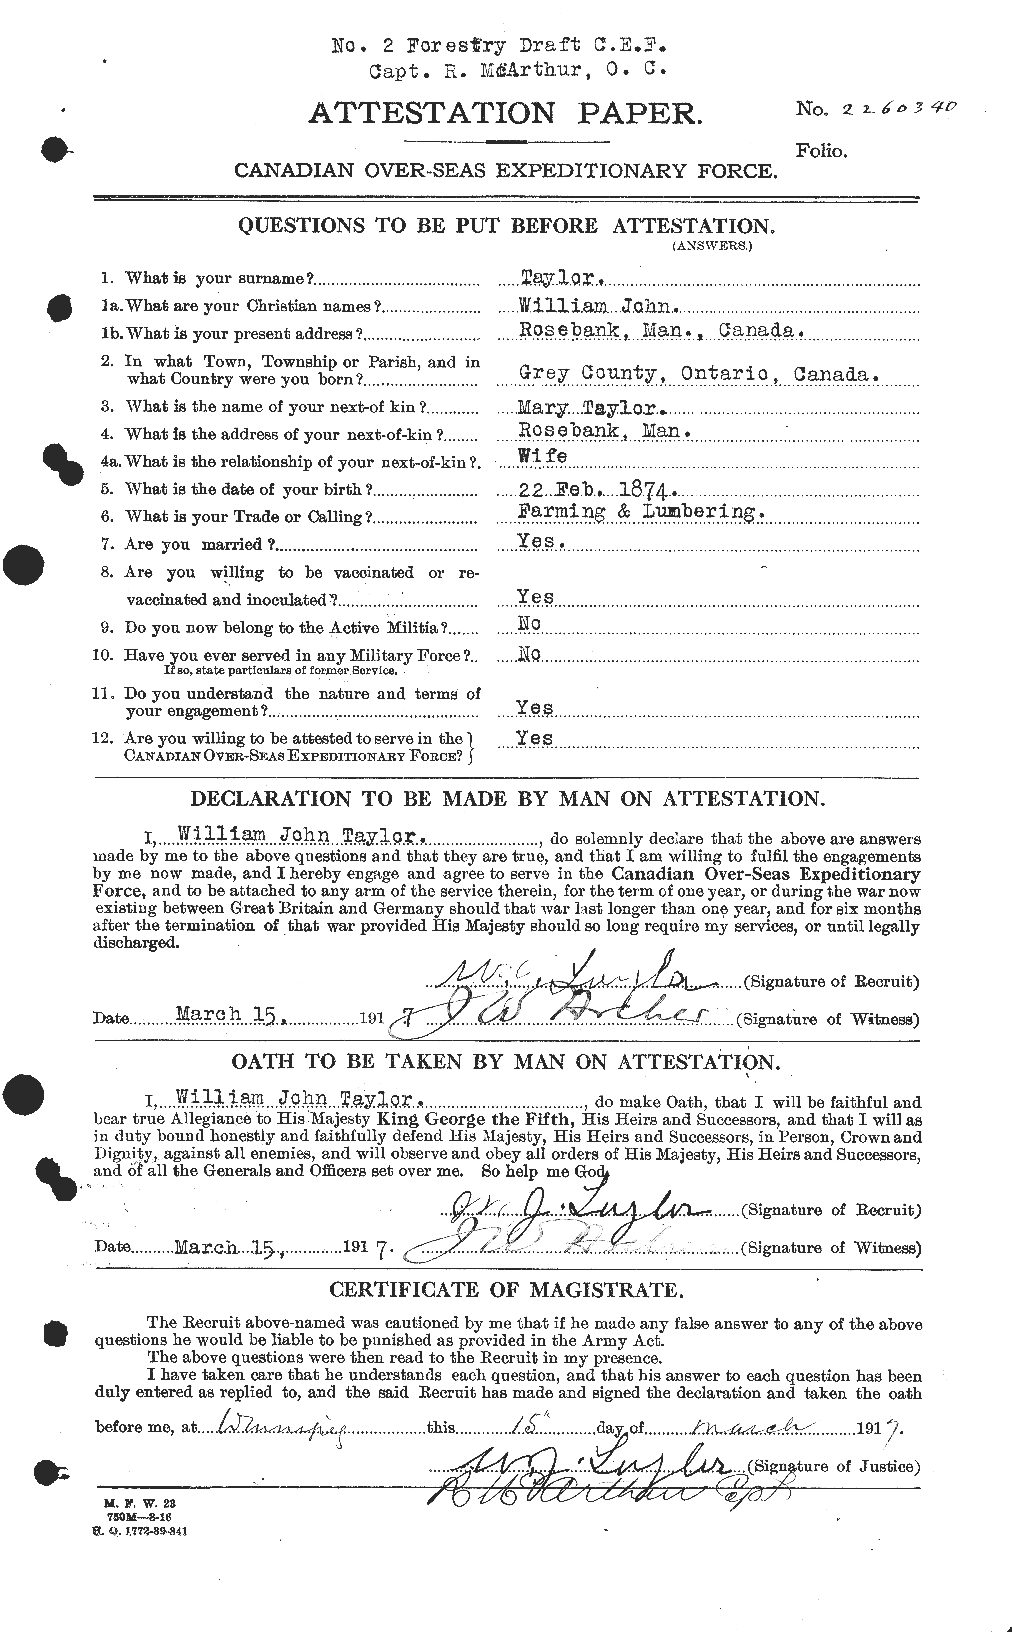 Personnel Records of the First World War - CEF 628302a